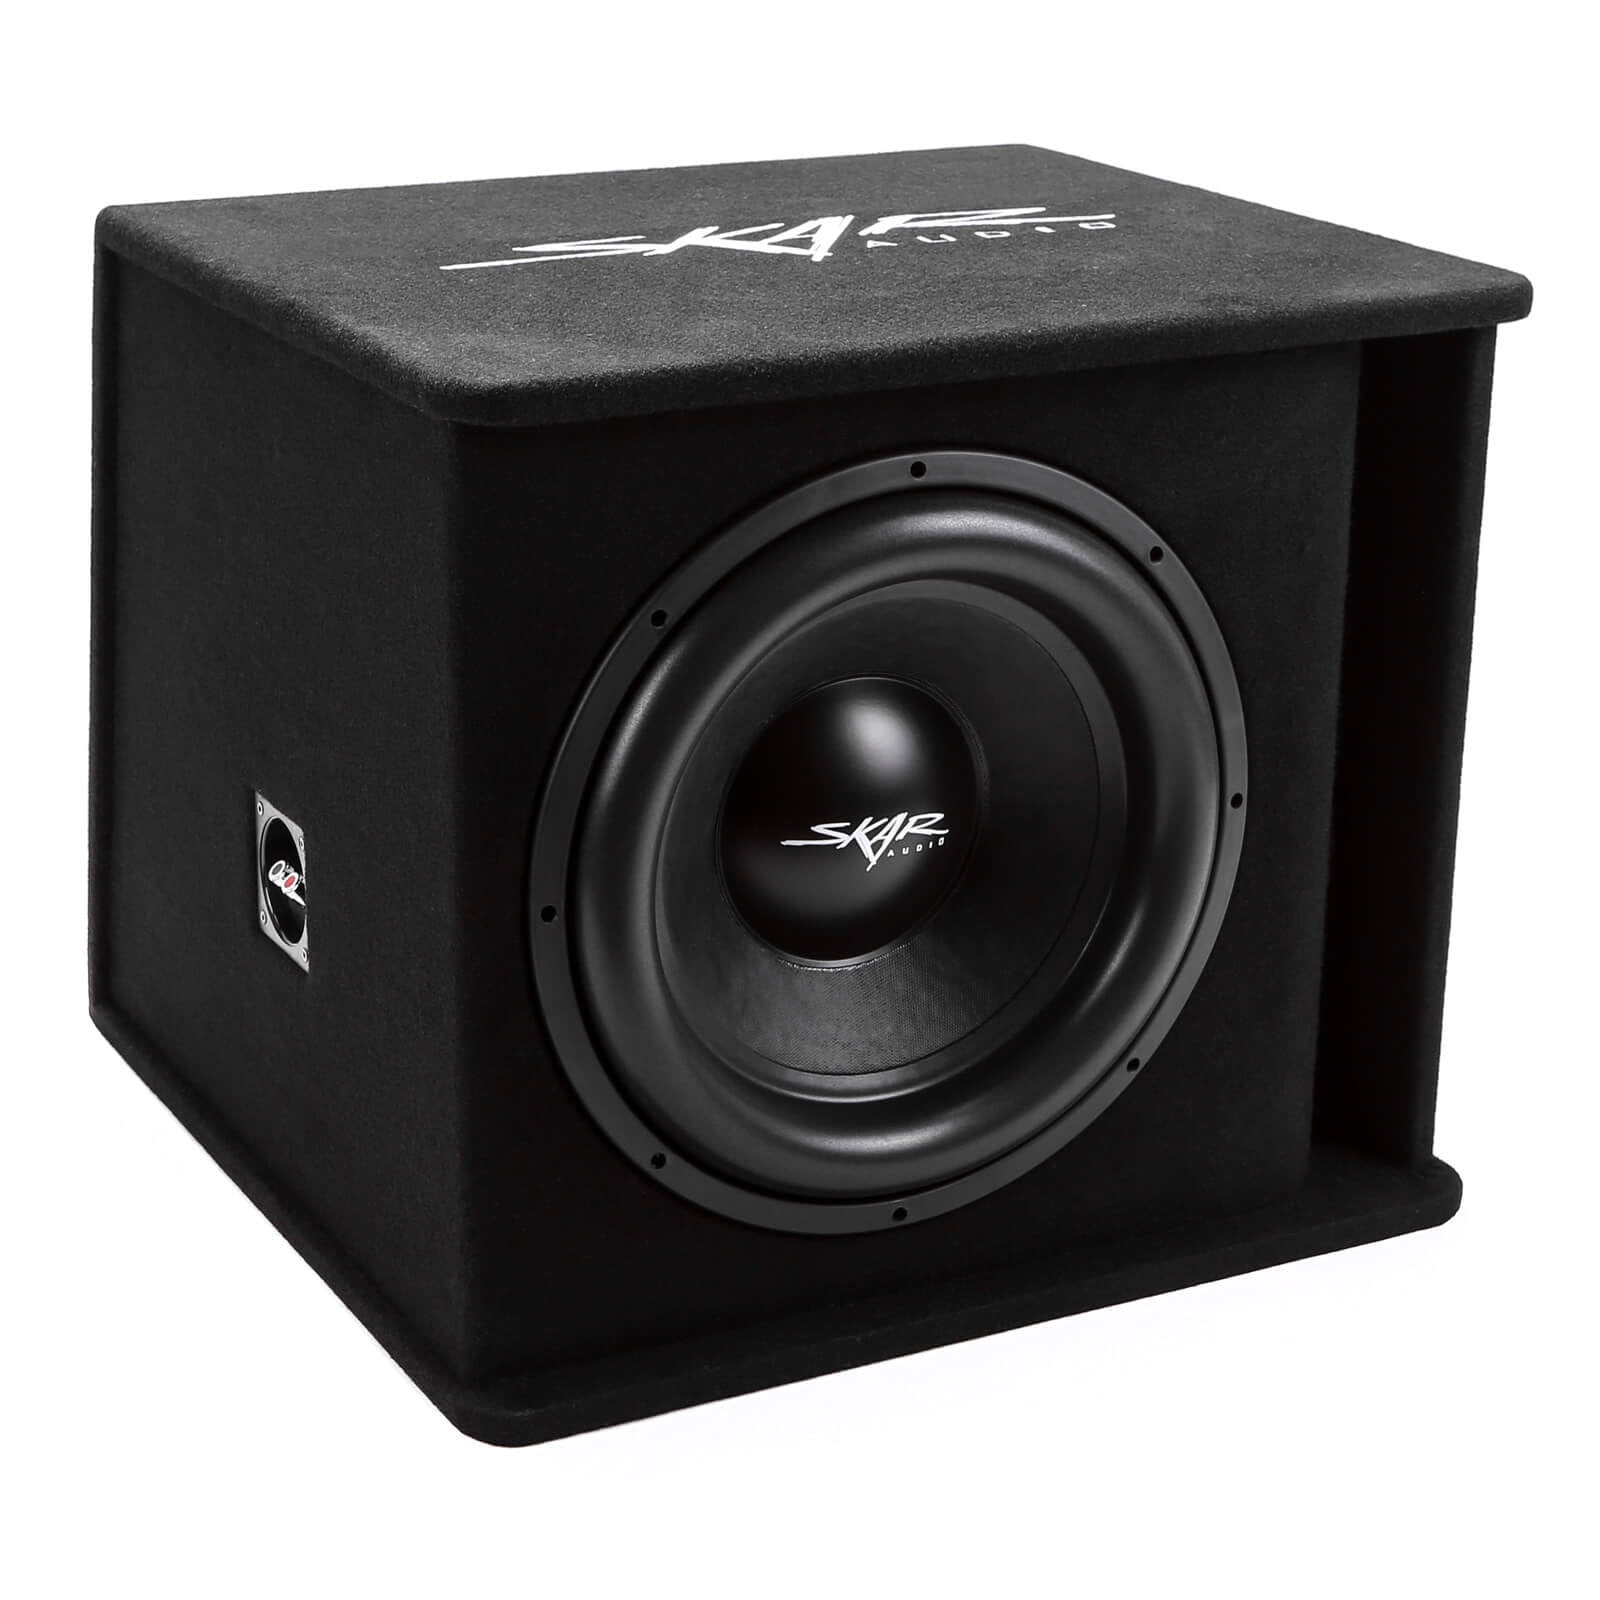 Includes Loaded Enclosure with Amplifier Skar Audio Single 15 Complete 1,200 Watt SDR Series Subwoofer Bass Package 